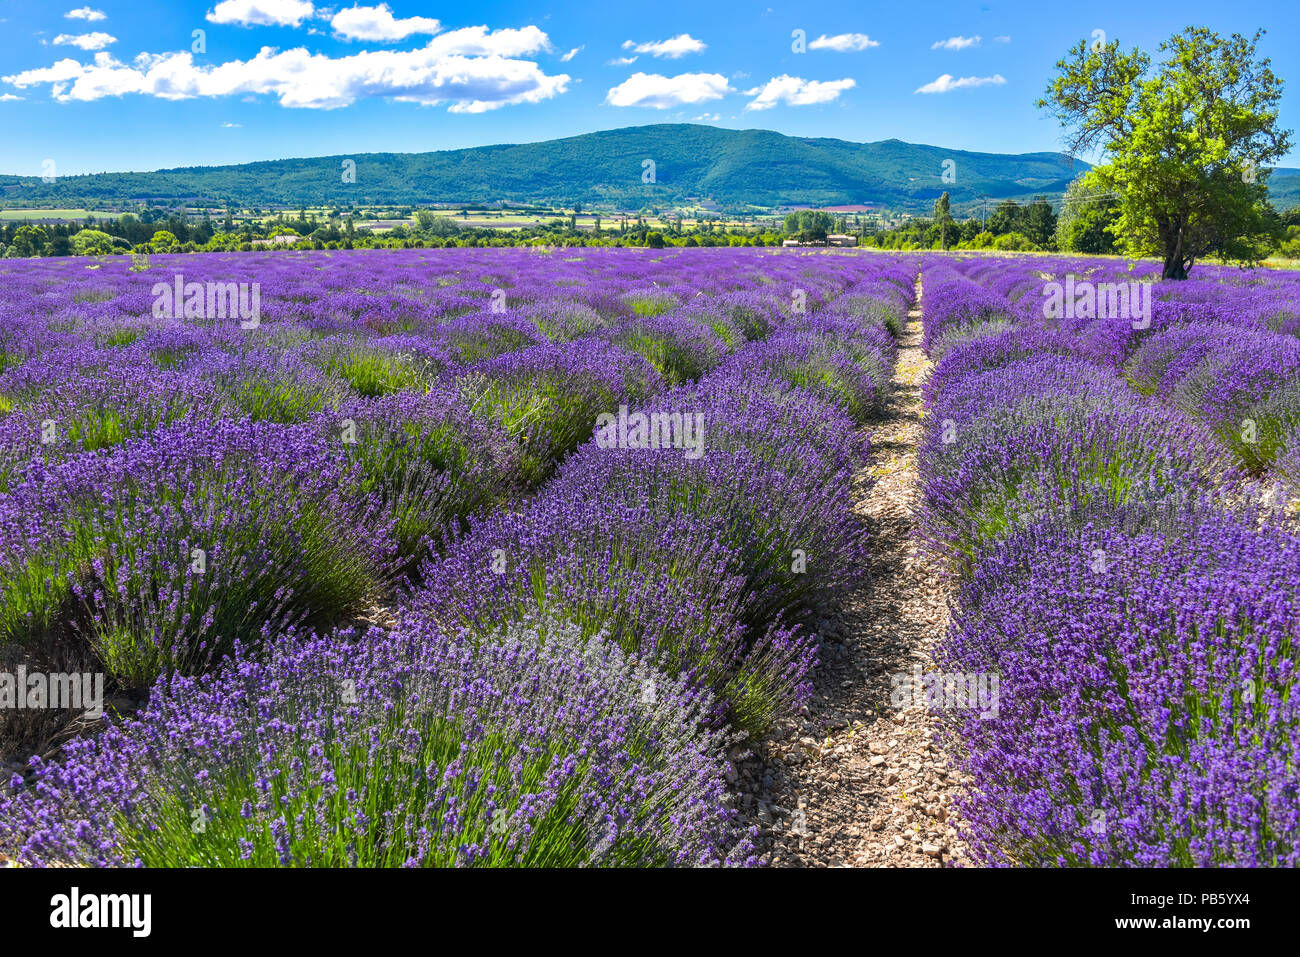 bloomy lavender rows near Sault, Provence, France, lavender field with mountains in background, department Vaucluse, region Provence-Alpes-Côte d'Azur Stock Photo